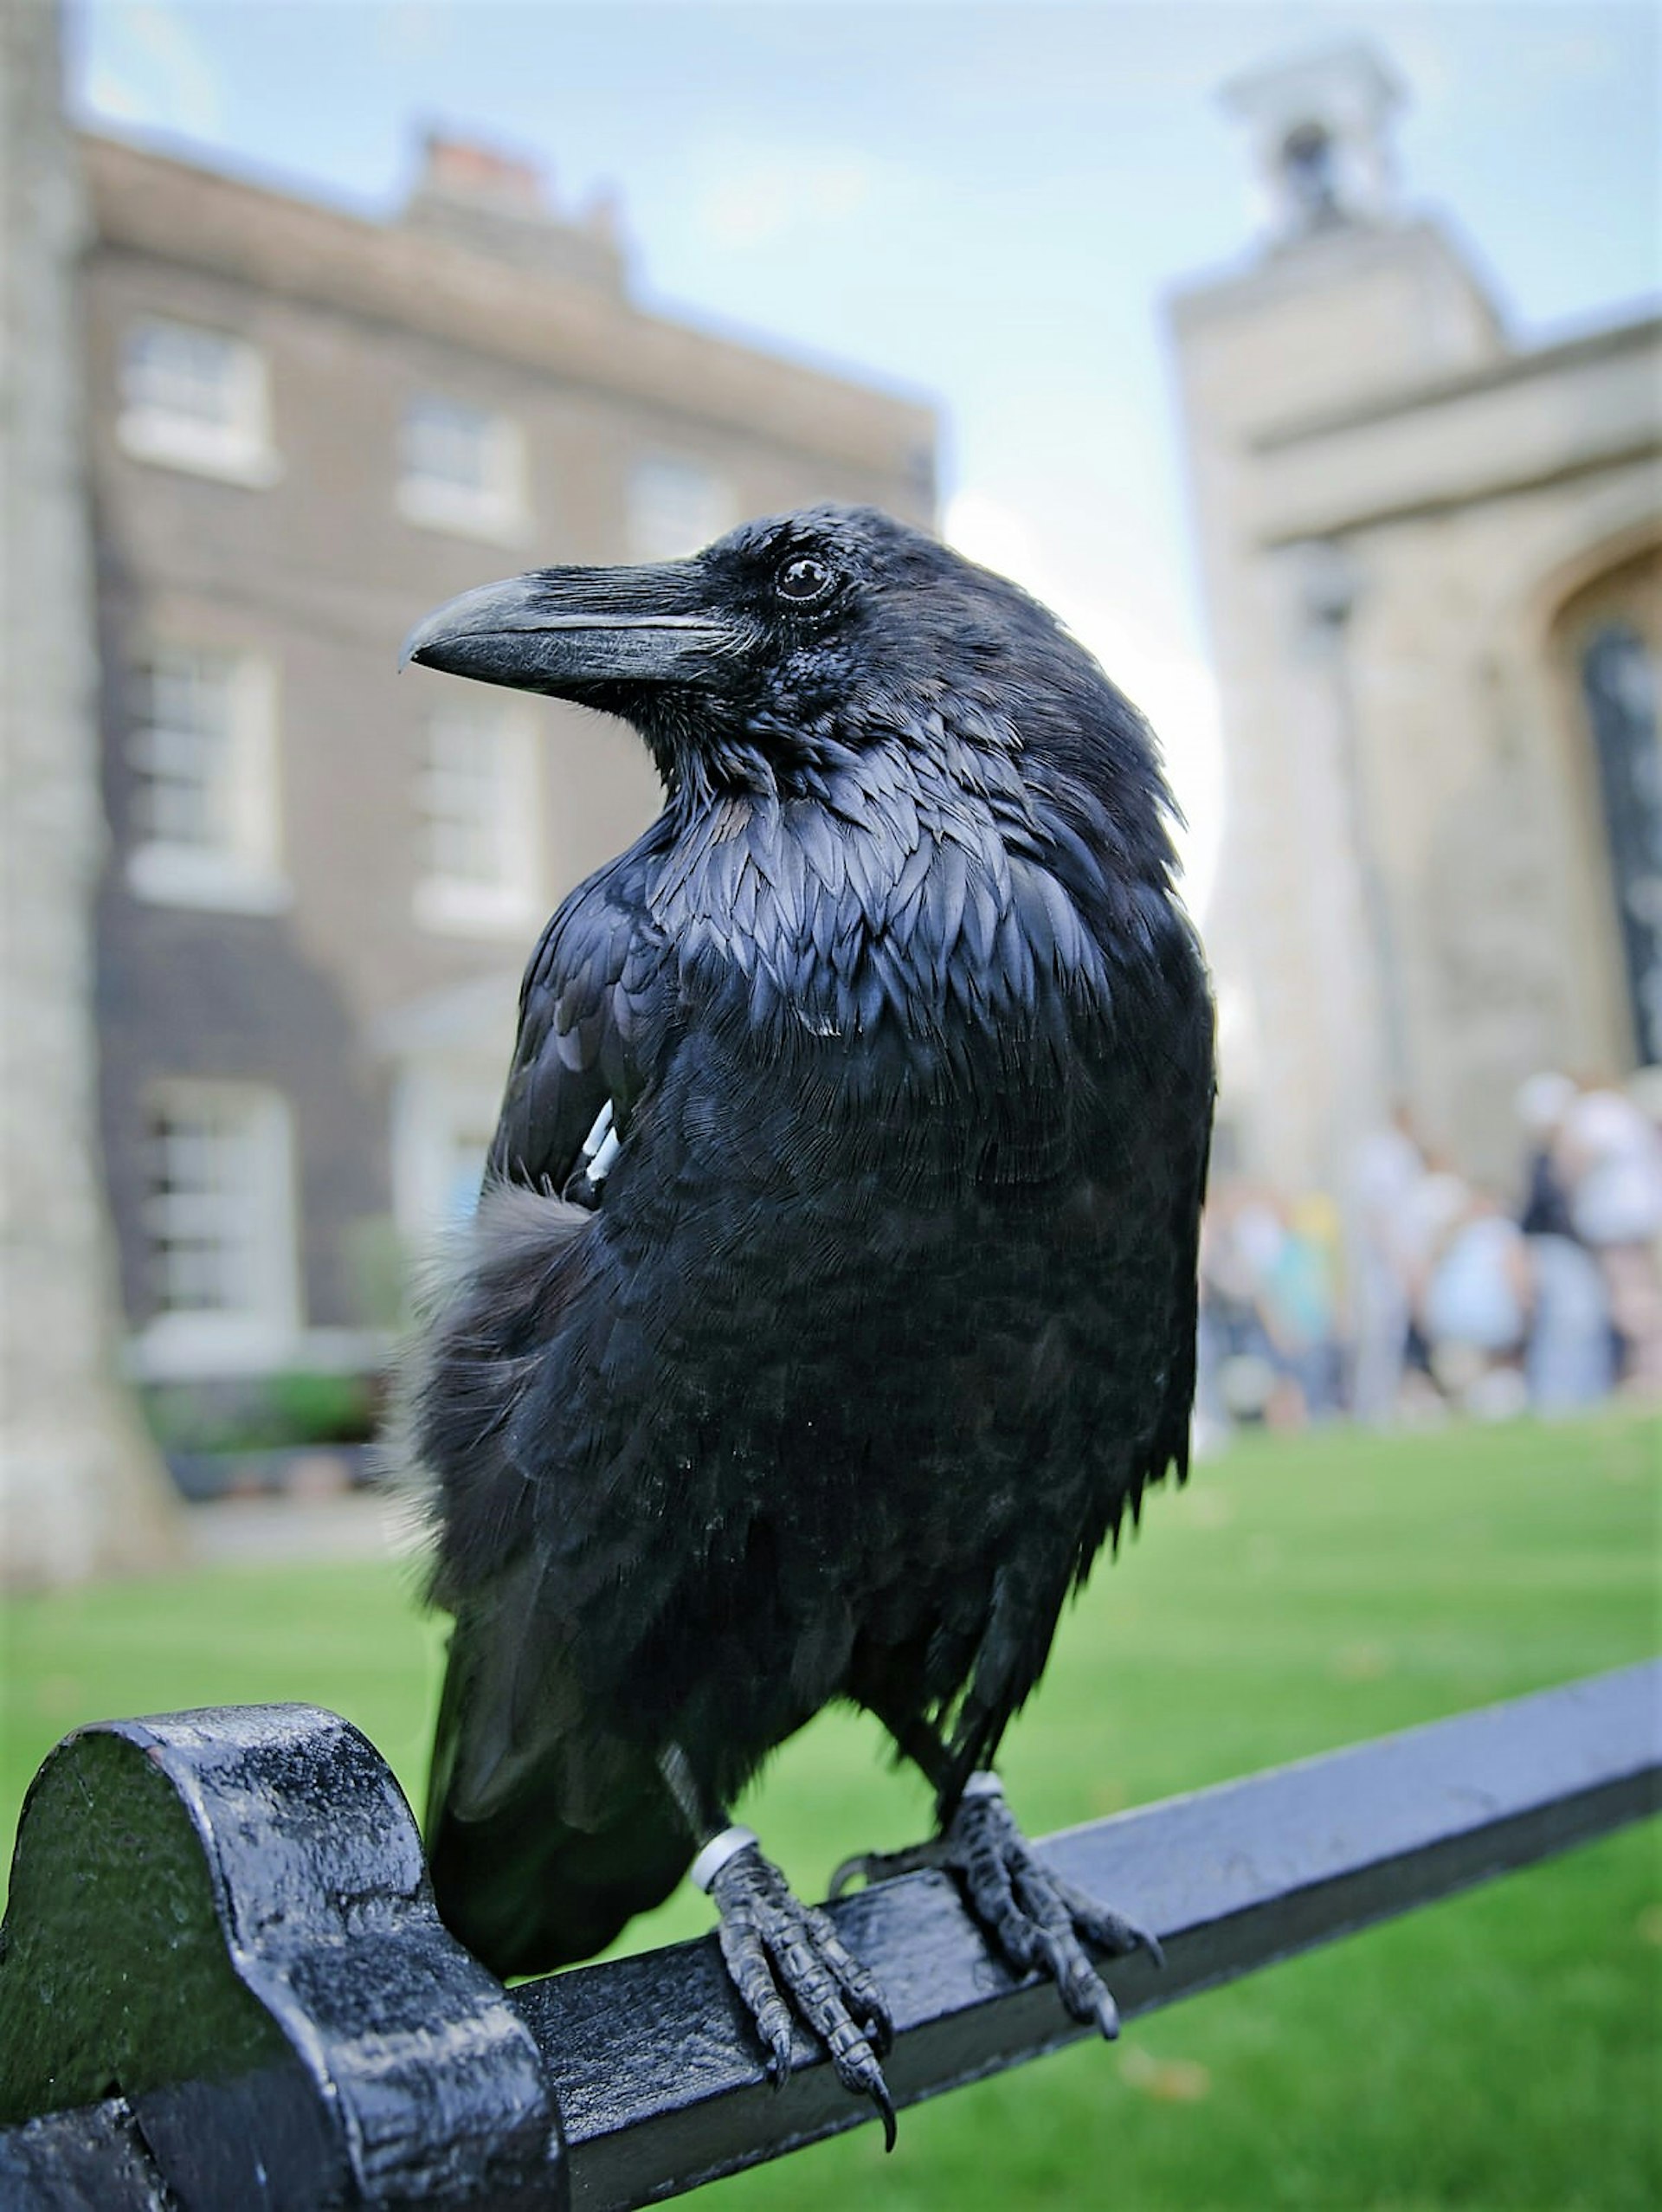 A raven in the Tower of London.